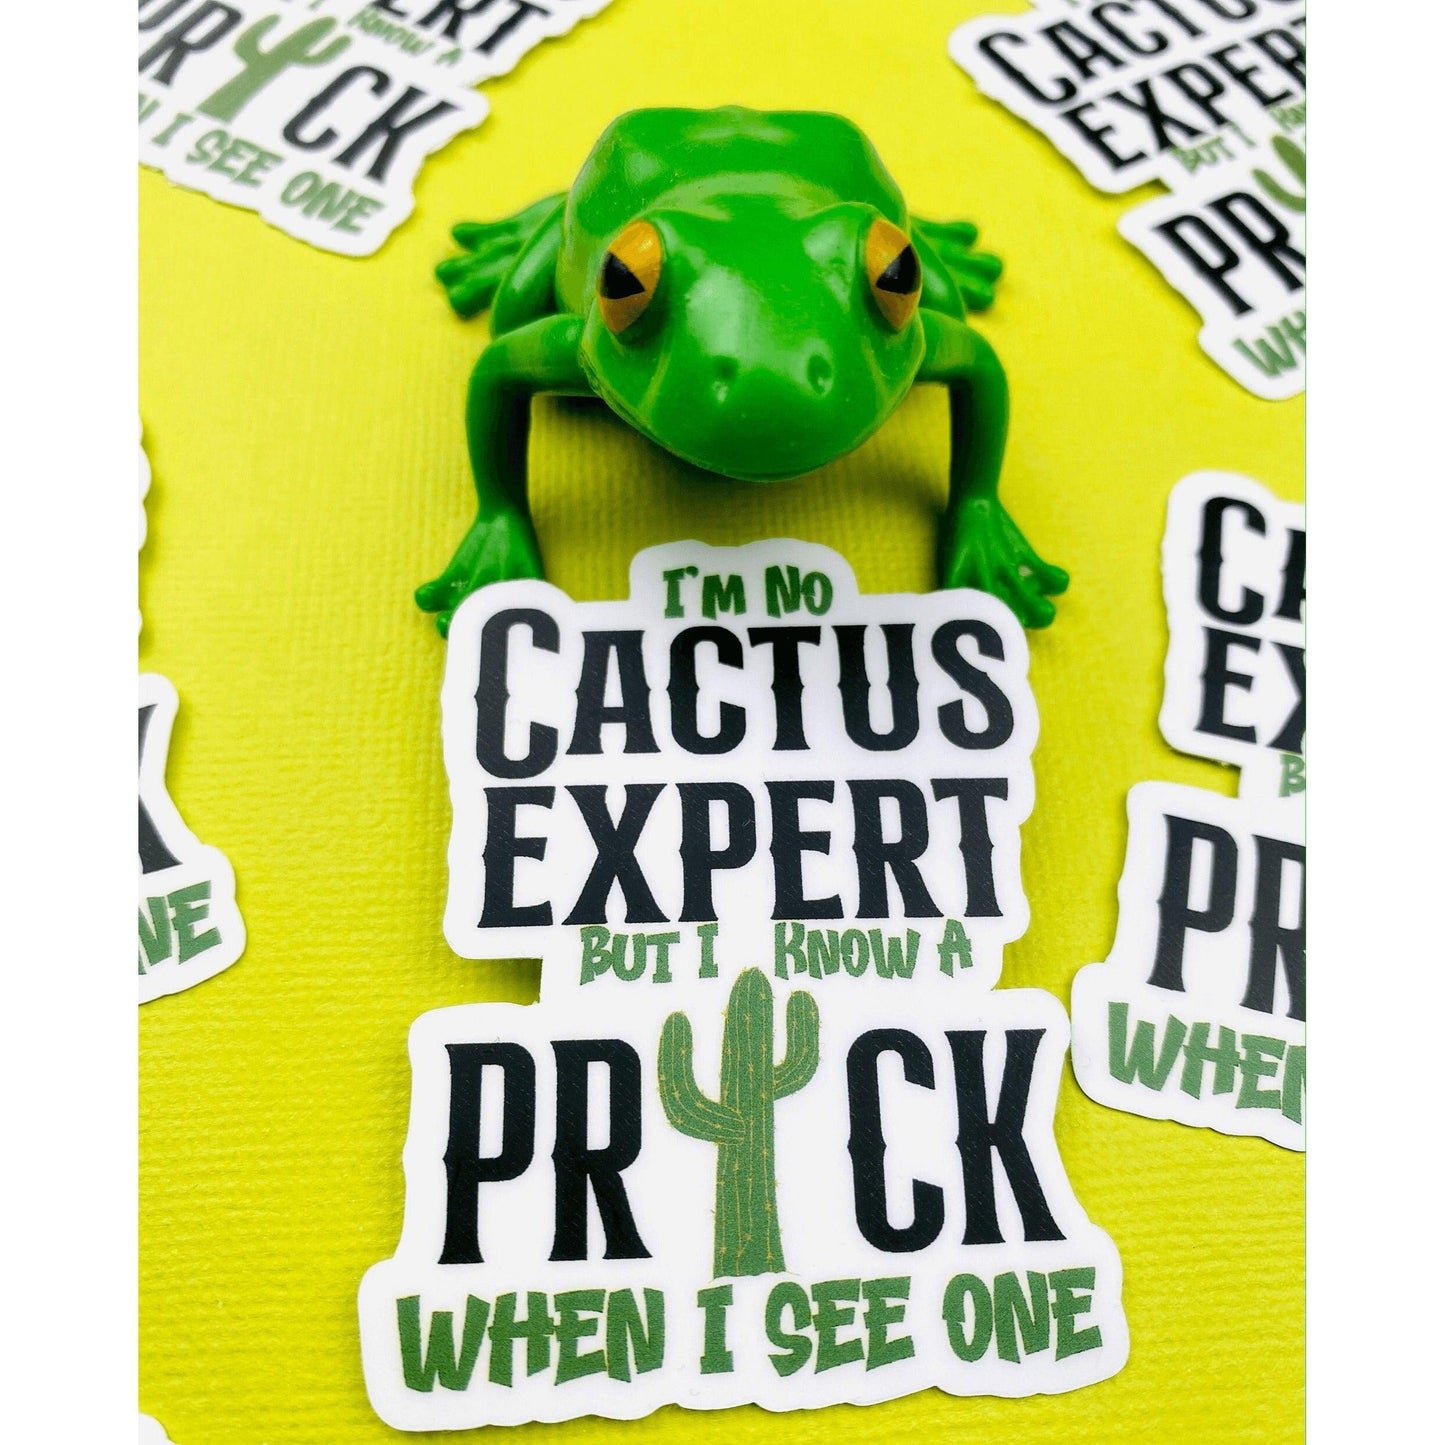 I'm No Cactus Expert Sticker I Know A Prick When I See One Sarcastic Sticker for Women Southwest Humor Western Stickers - Ottos Grotto :: Stickers For Your Stuff